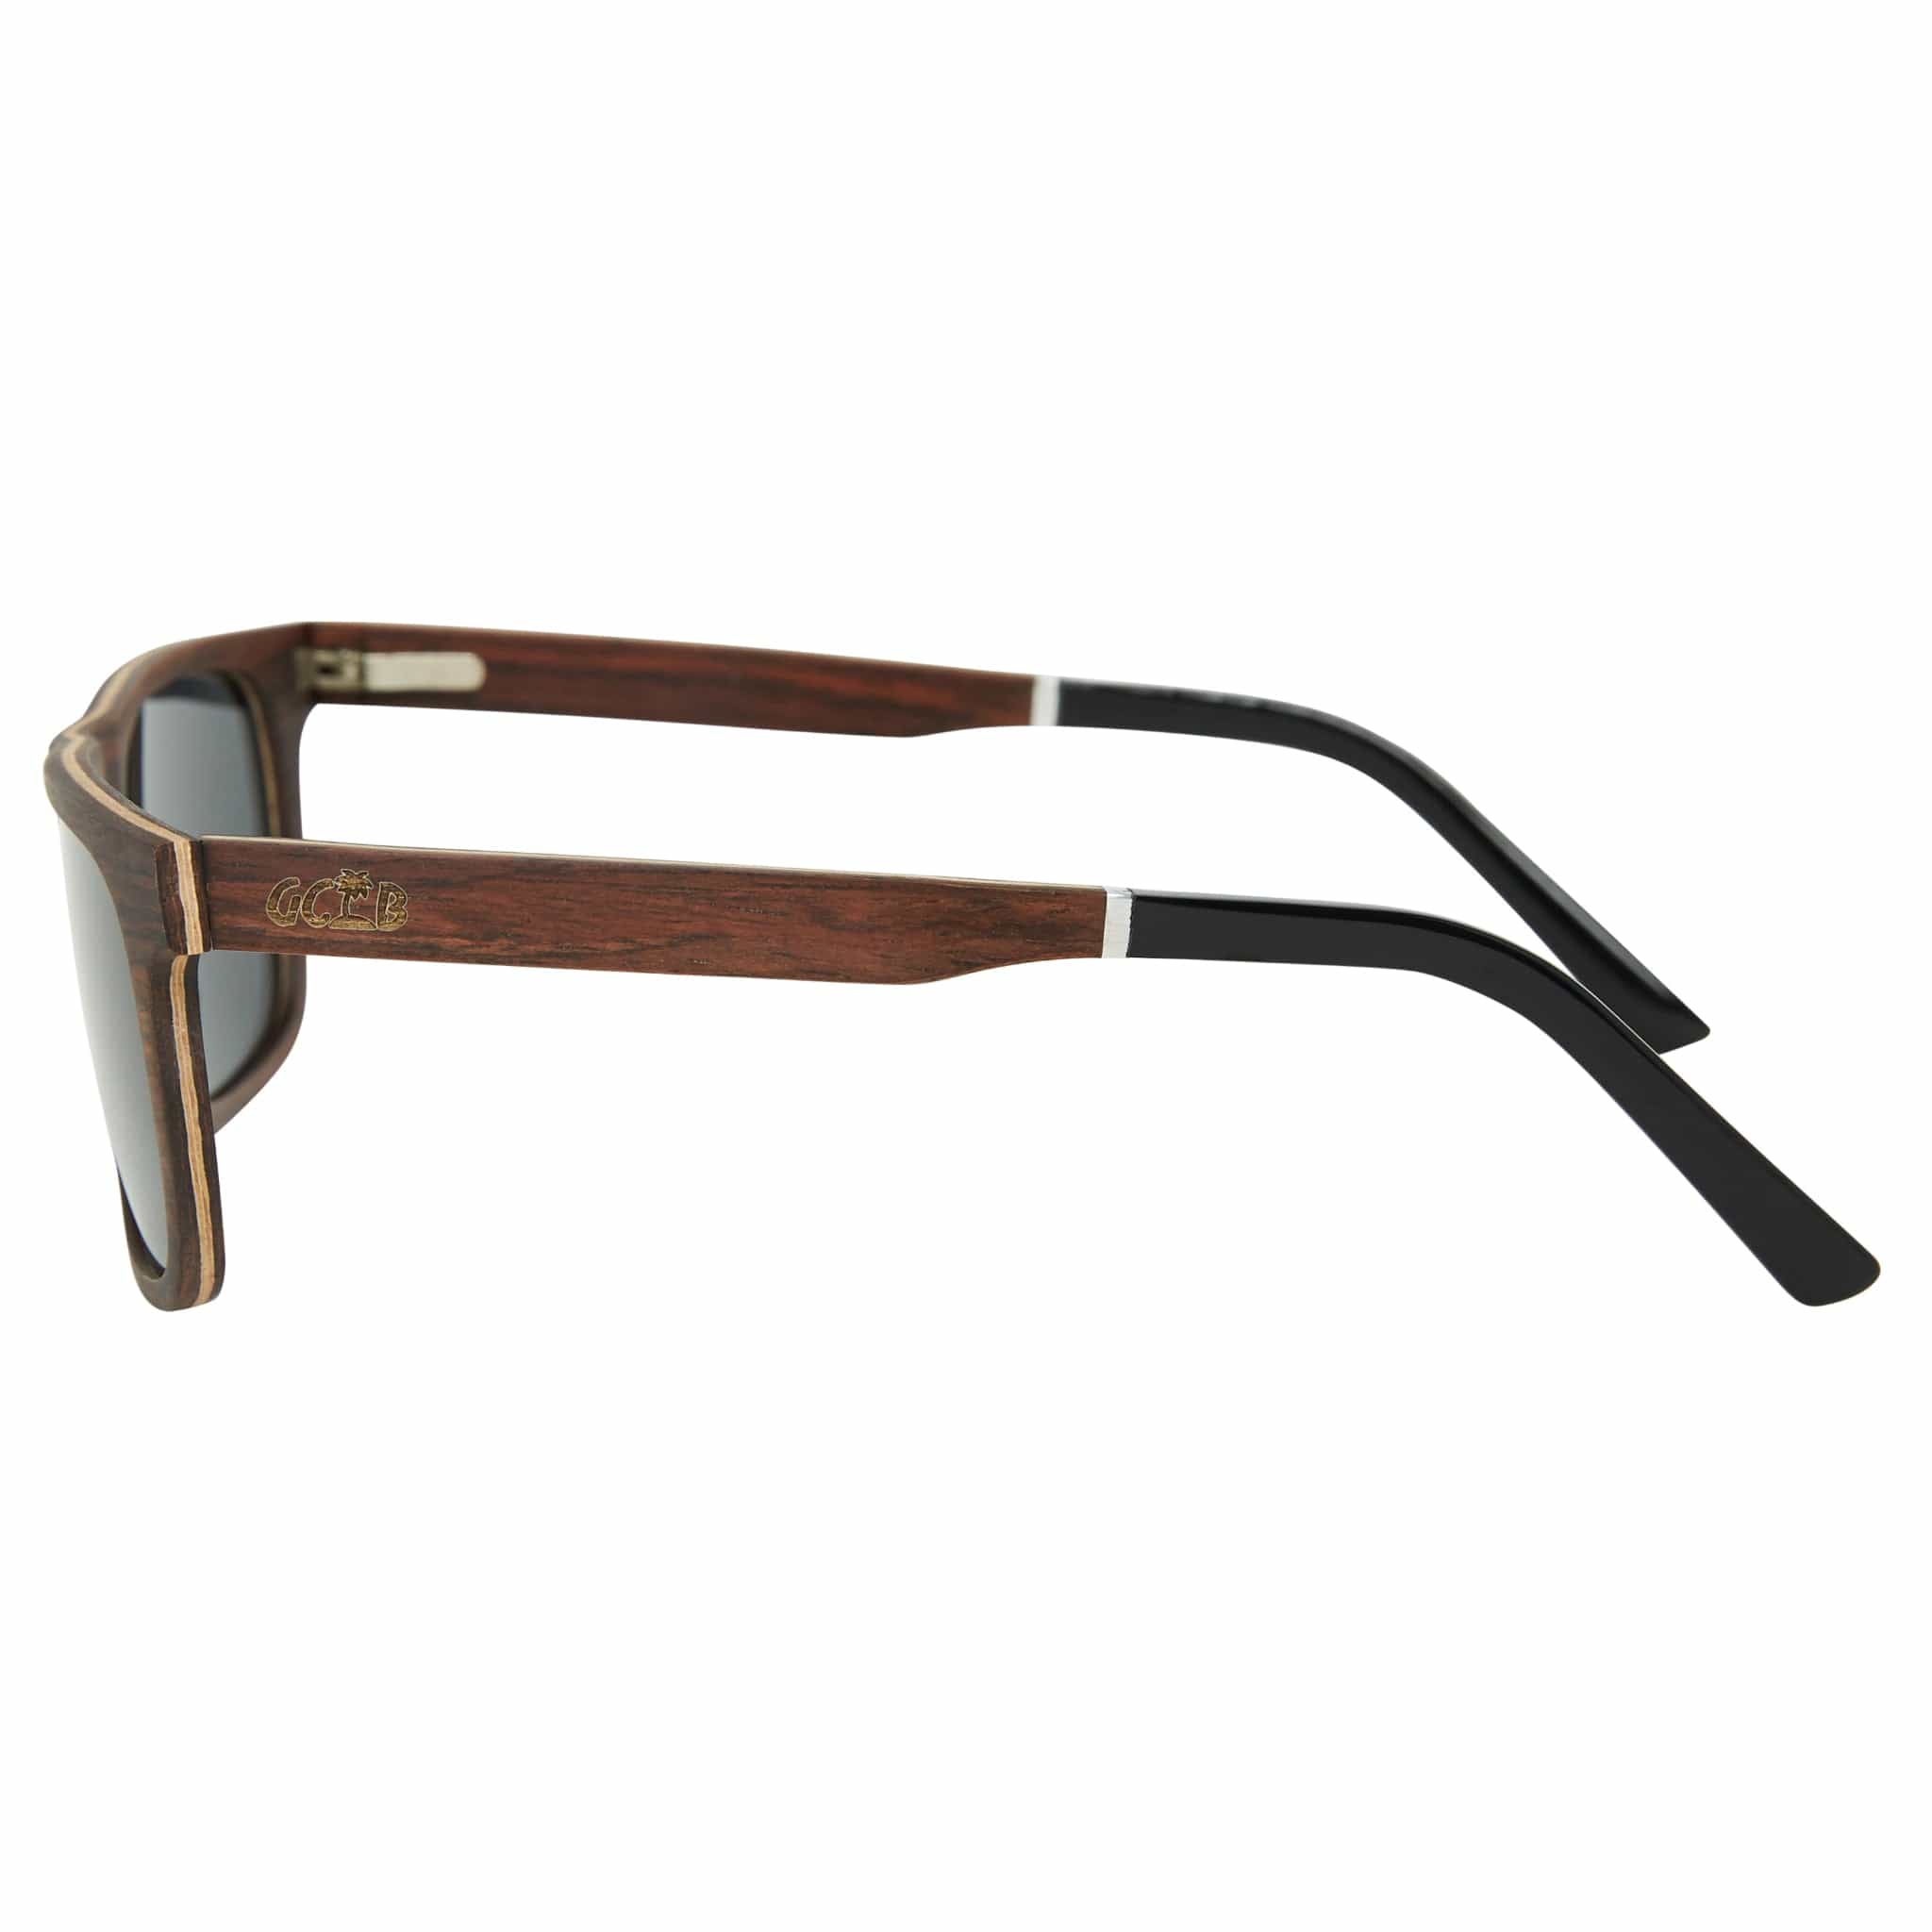 Gold Coast Longboards Sunglasses Large - 148mm Snapper - Brown